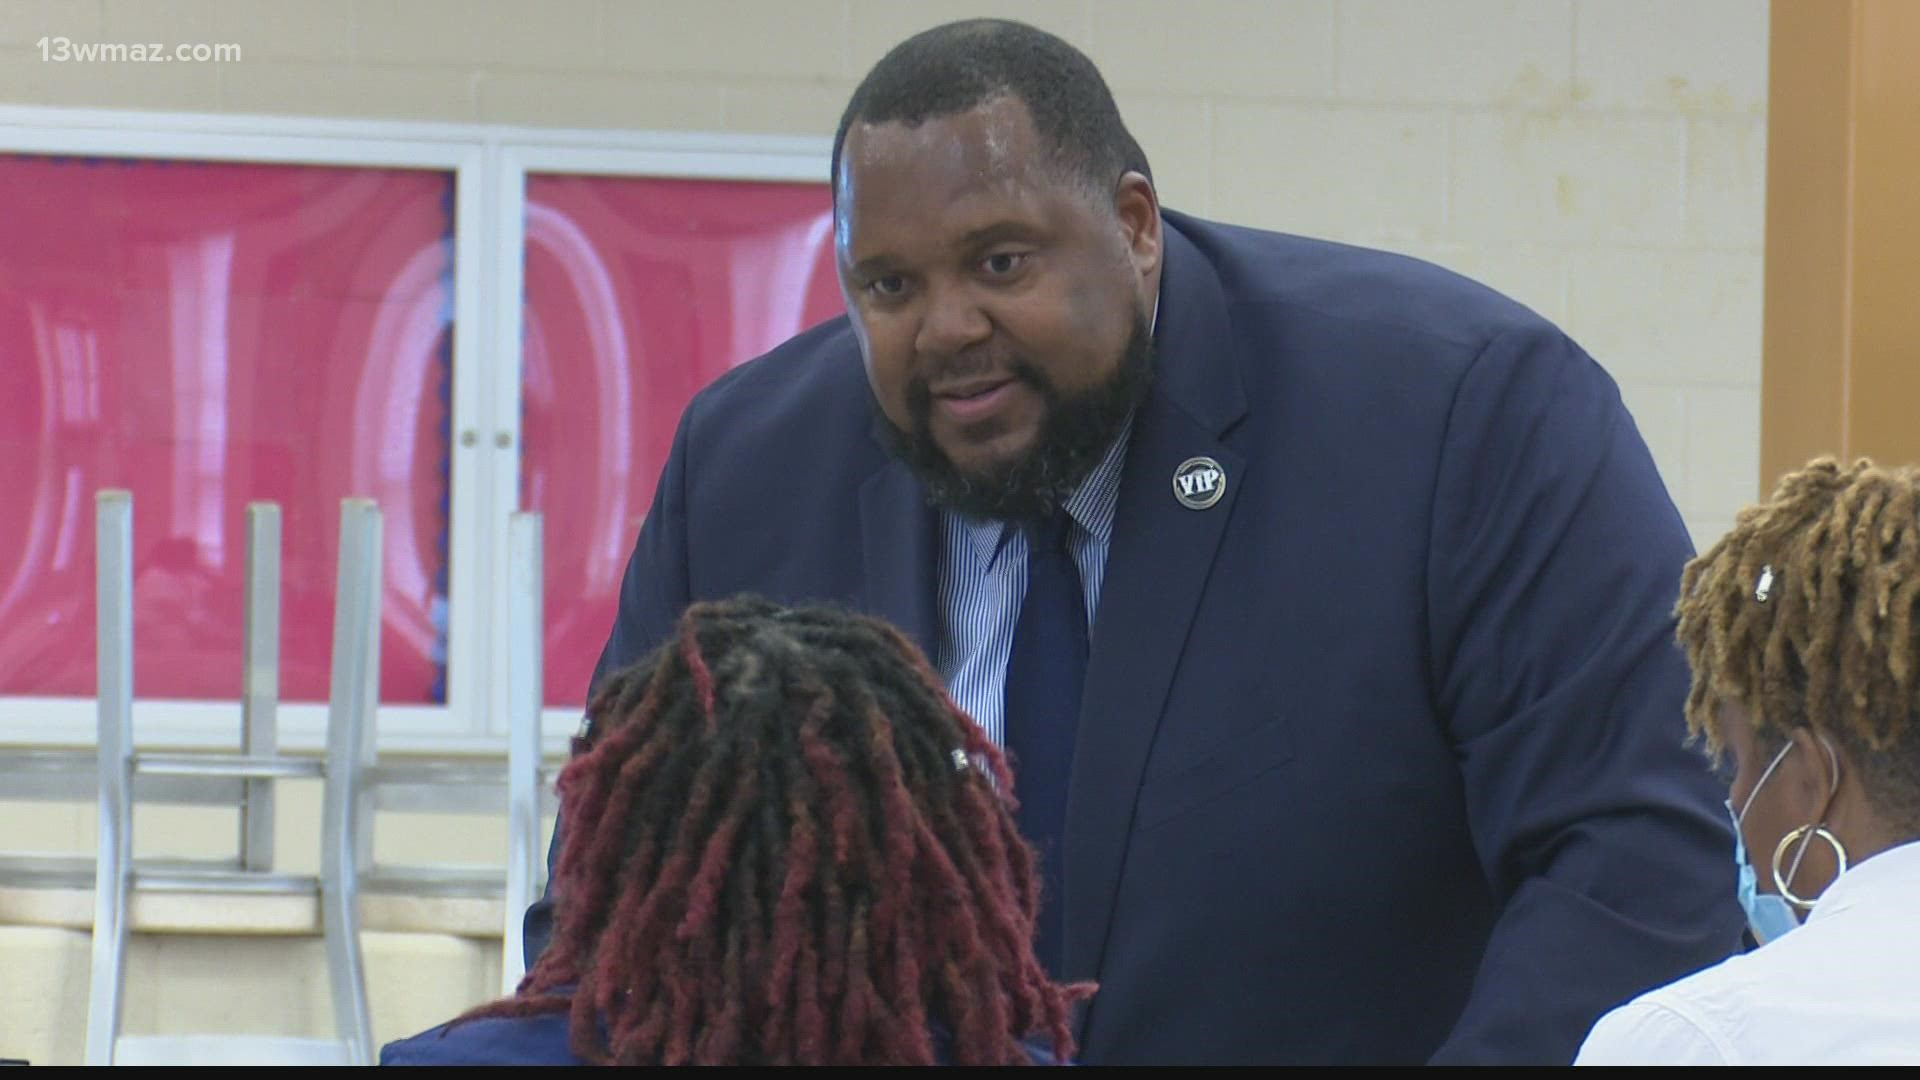 Principal Bernard Young previously served as the assistant principal at Southwest High School